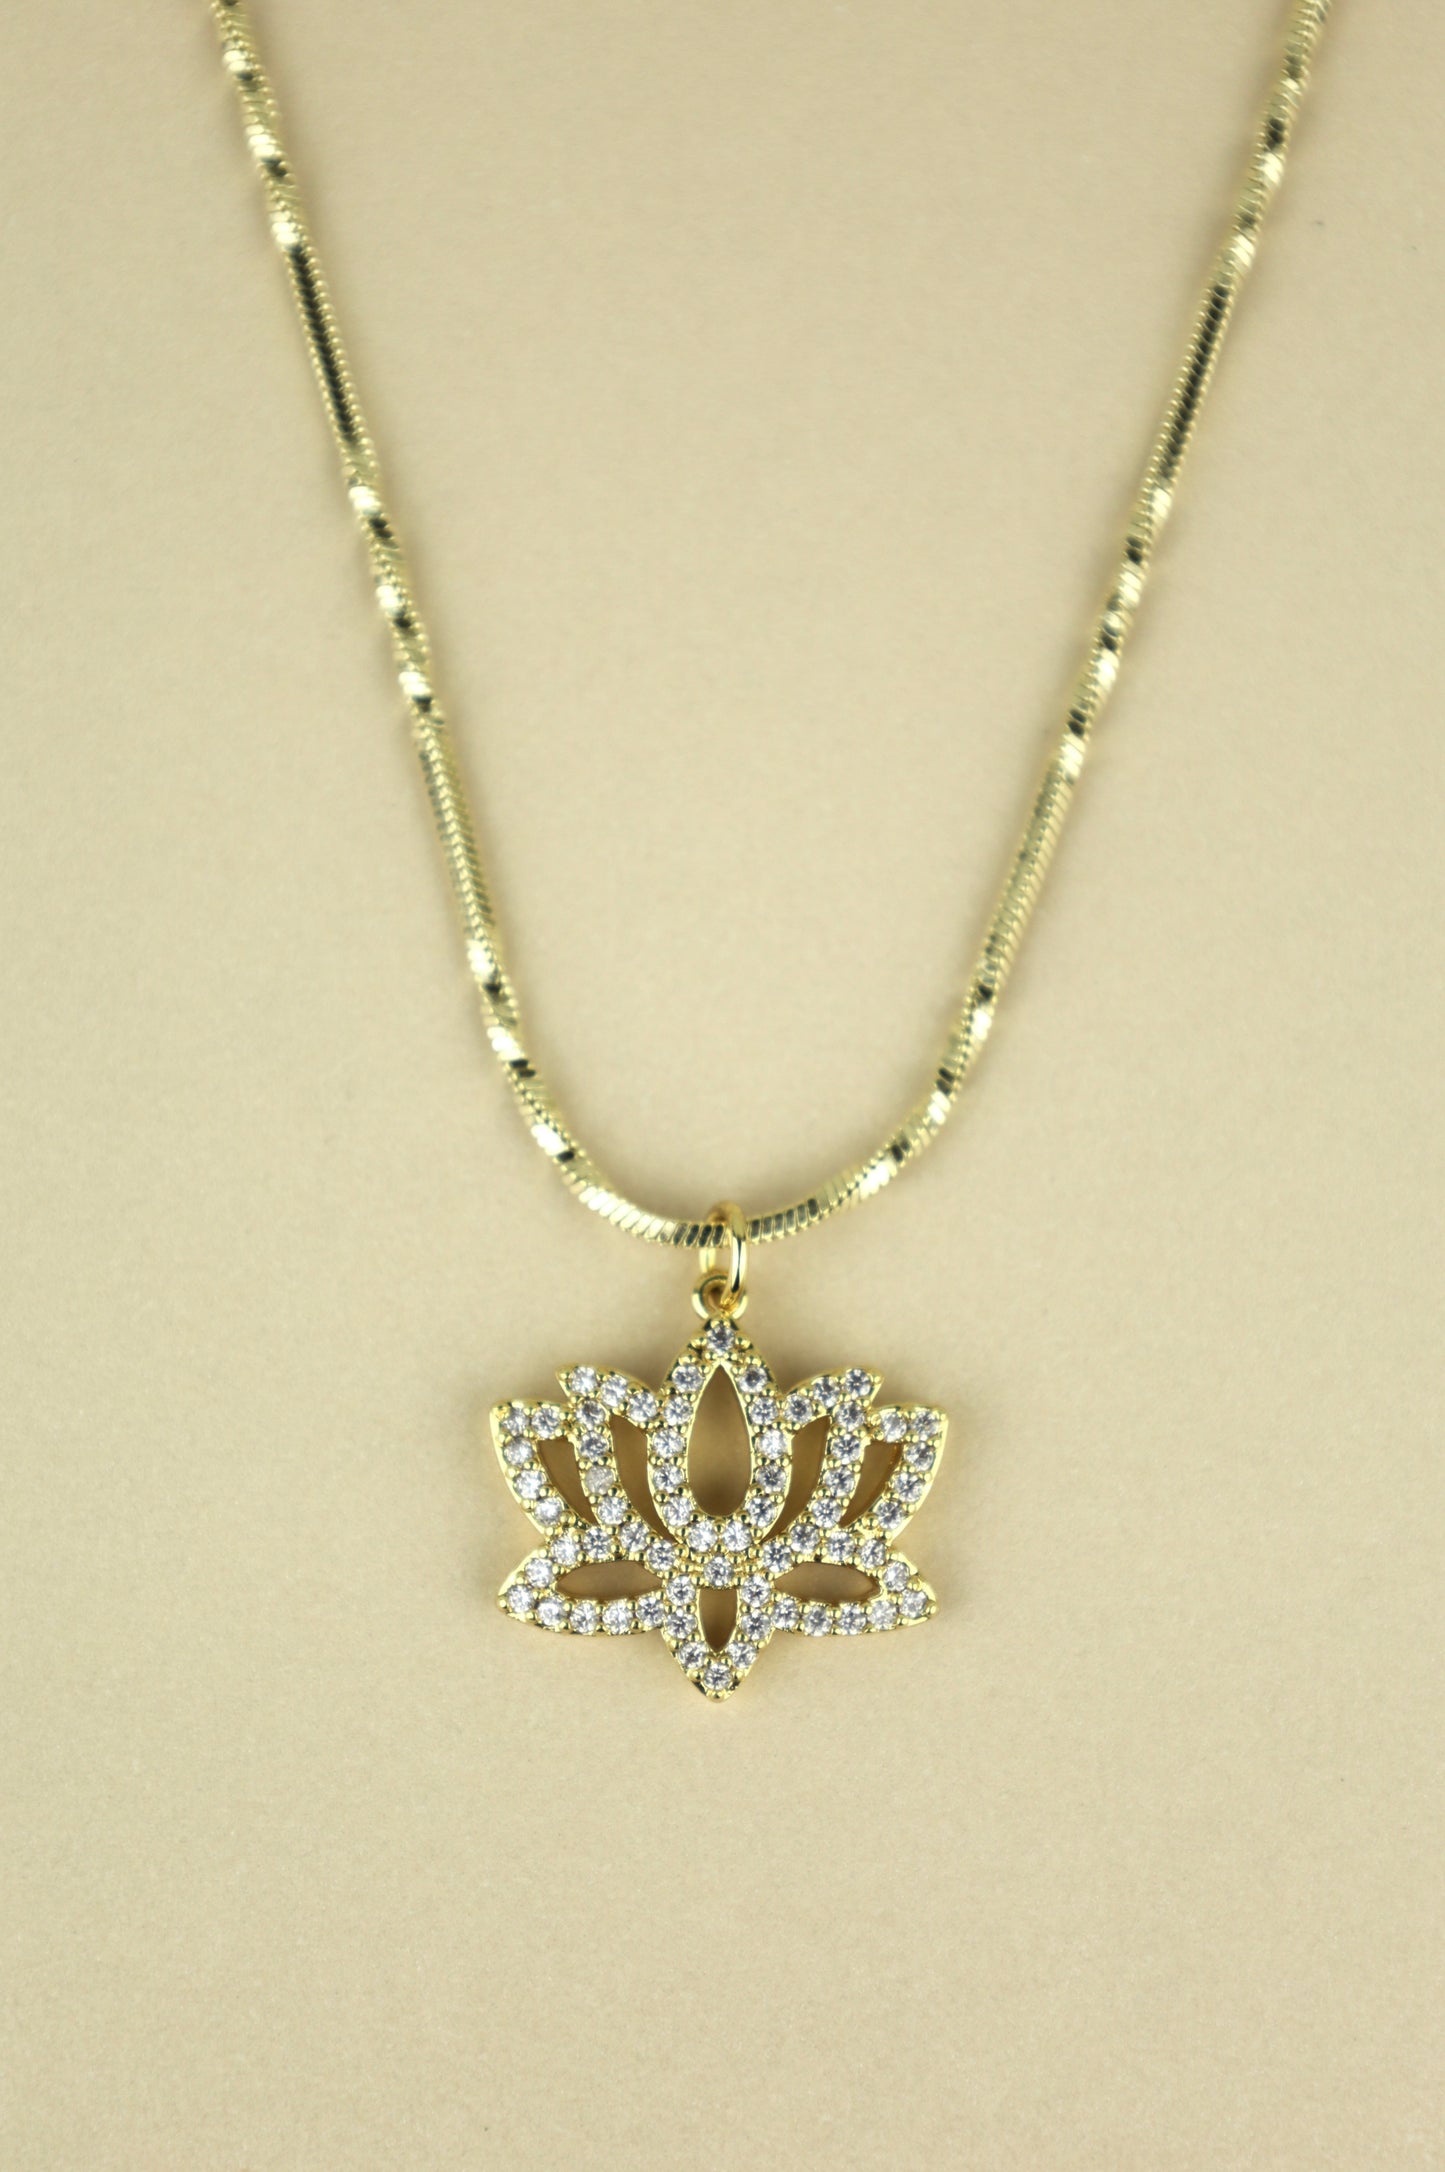 Lotus necklace in gold